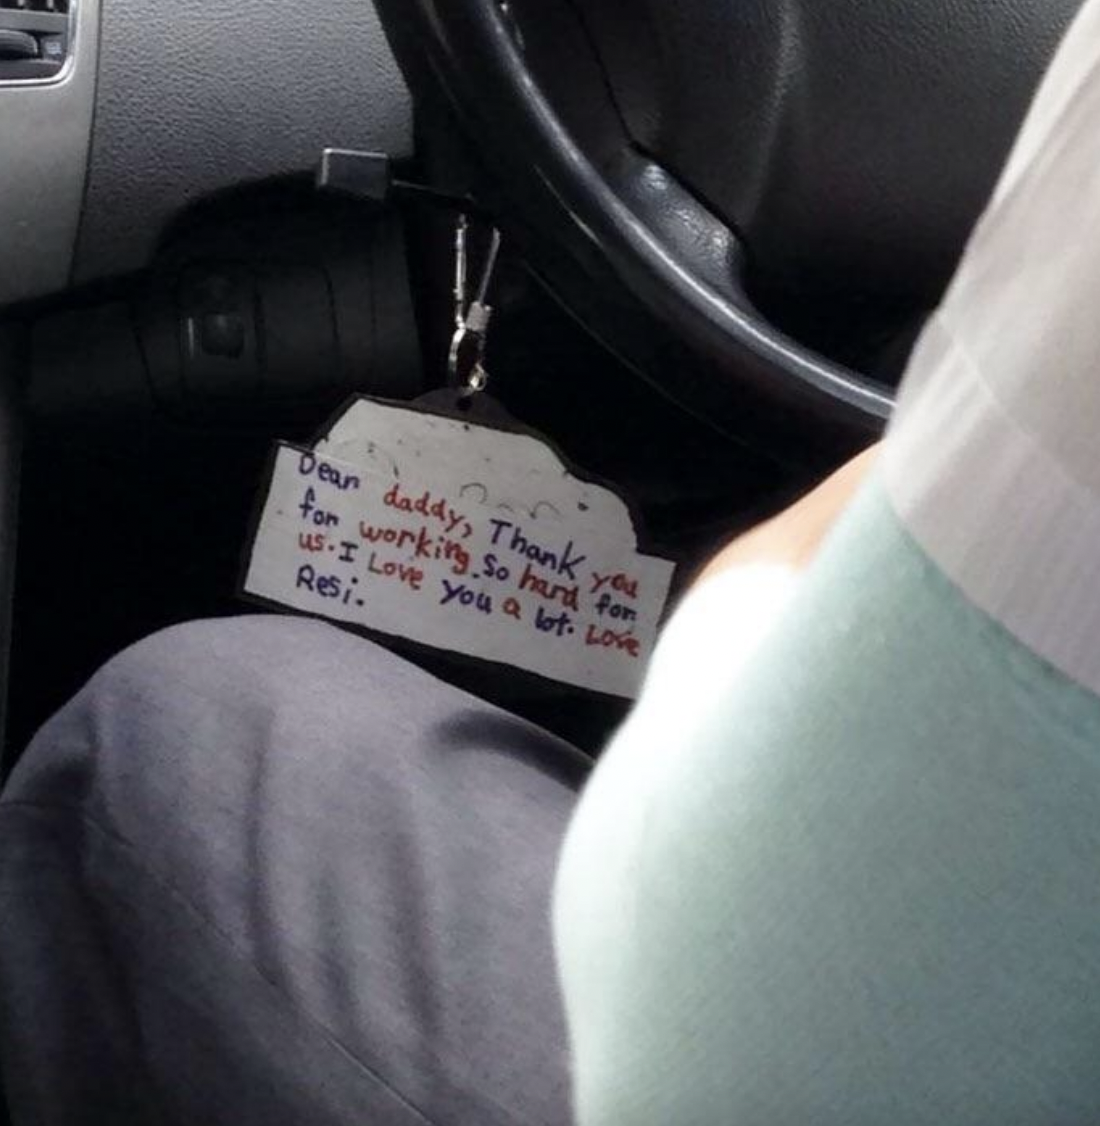 the note on the car keychain